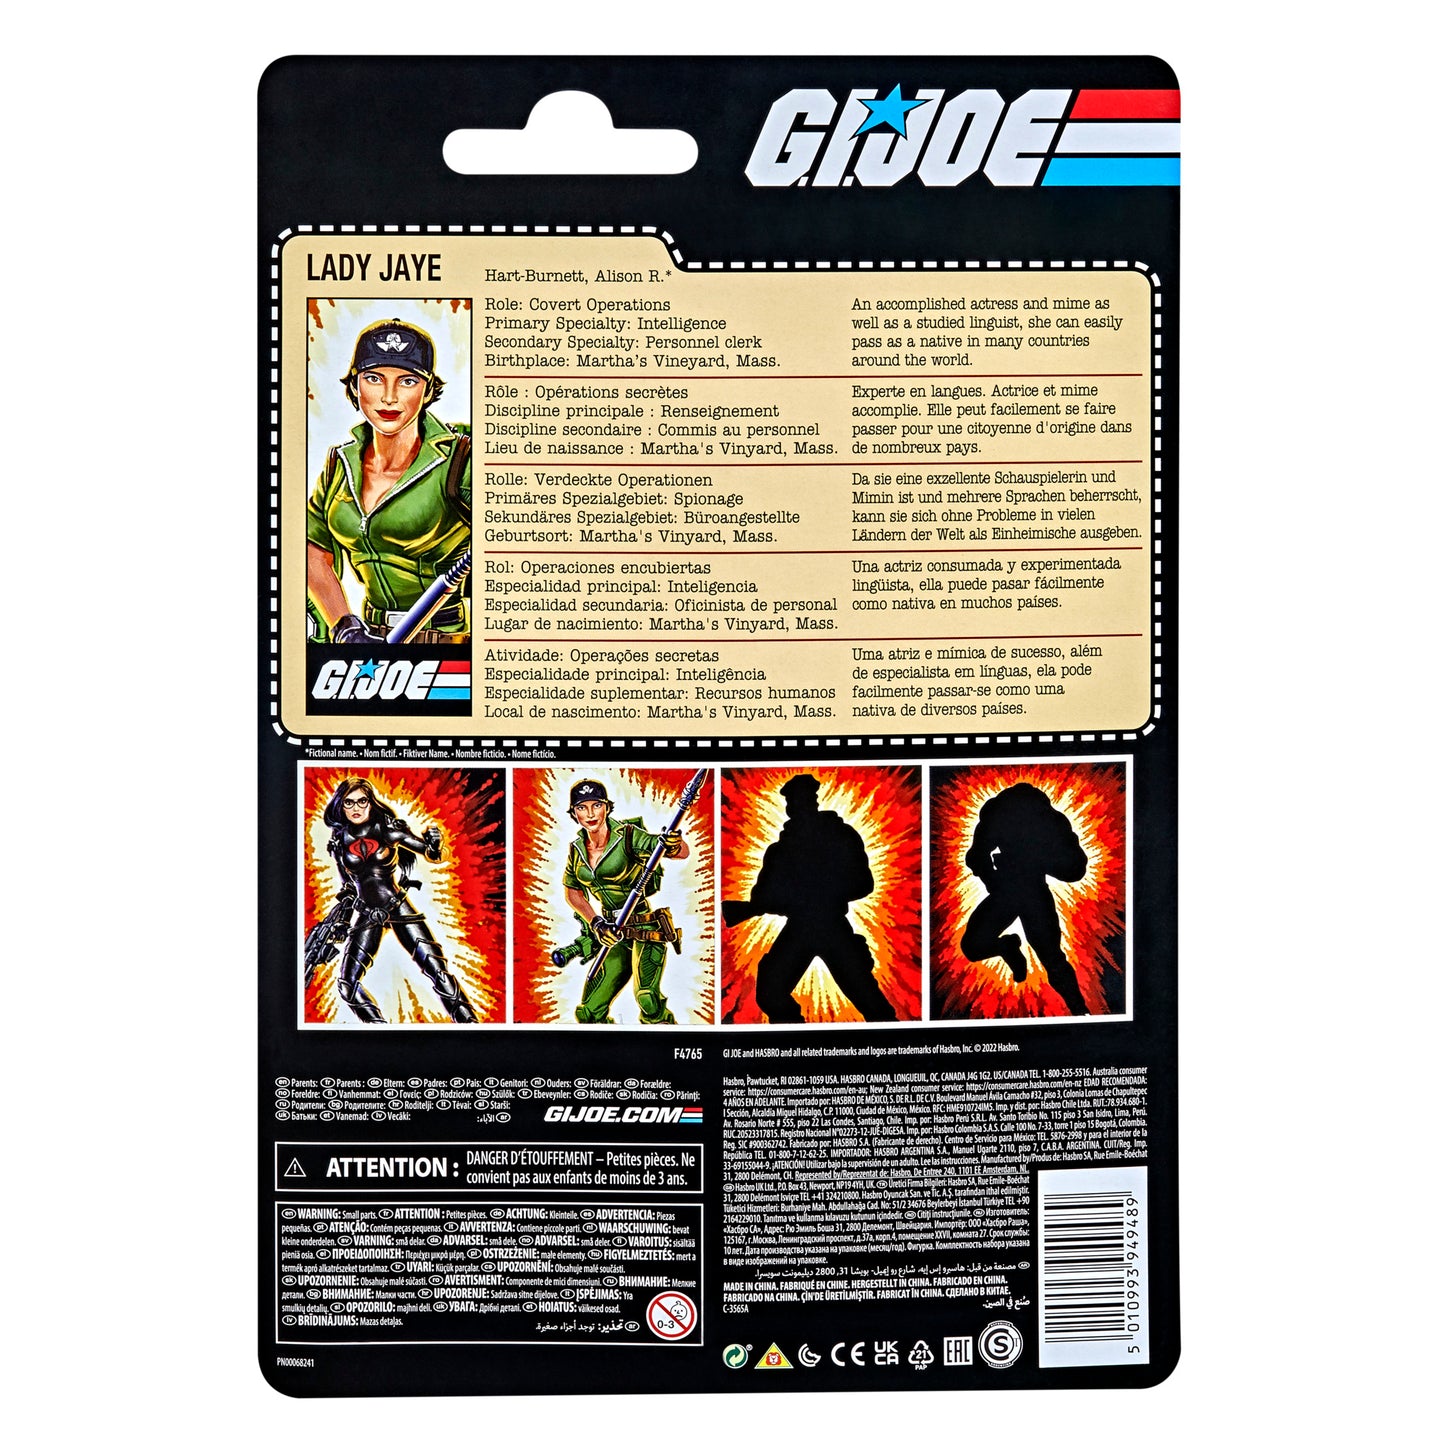 G.I. Joe Classified Series Lady Jaye Action Figure Collectible Premium Toy back view - Heretoserveyou 